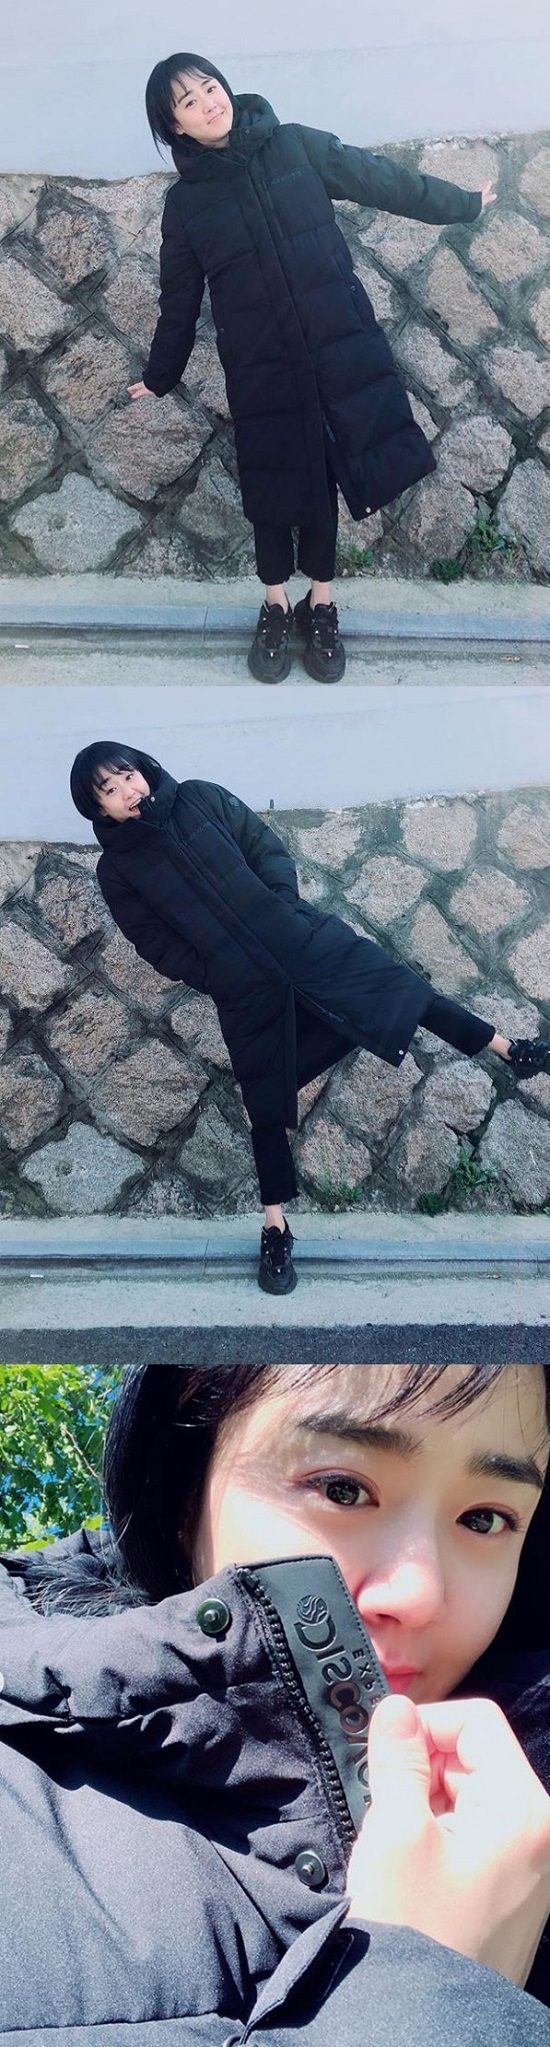 Actor Moon Geun-young told me about his recent situation during filming the drama.Moon posted a photo on his instagram on the 10th.The photo shows Moon Geun-young, who is wearing a black Long padding and taking various poses. Especially, he boasts beauty while he is still alive.On the other hand, Moon Geun Young will appear on TVN drama Catch the Ghost which is scheduled to be broadcasted on the 21st.Photo: Moon Geun-young Instagram